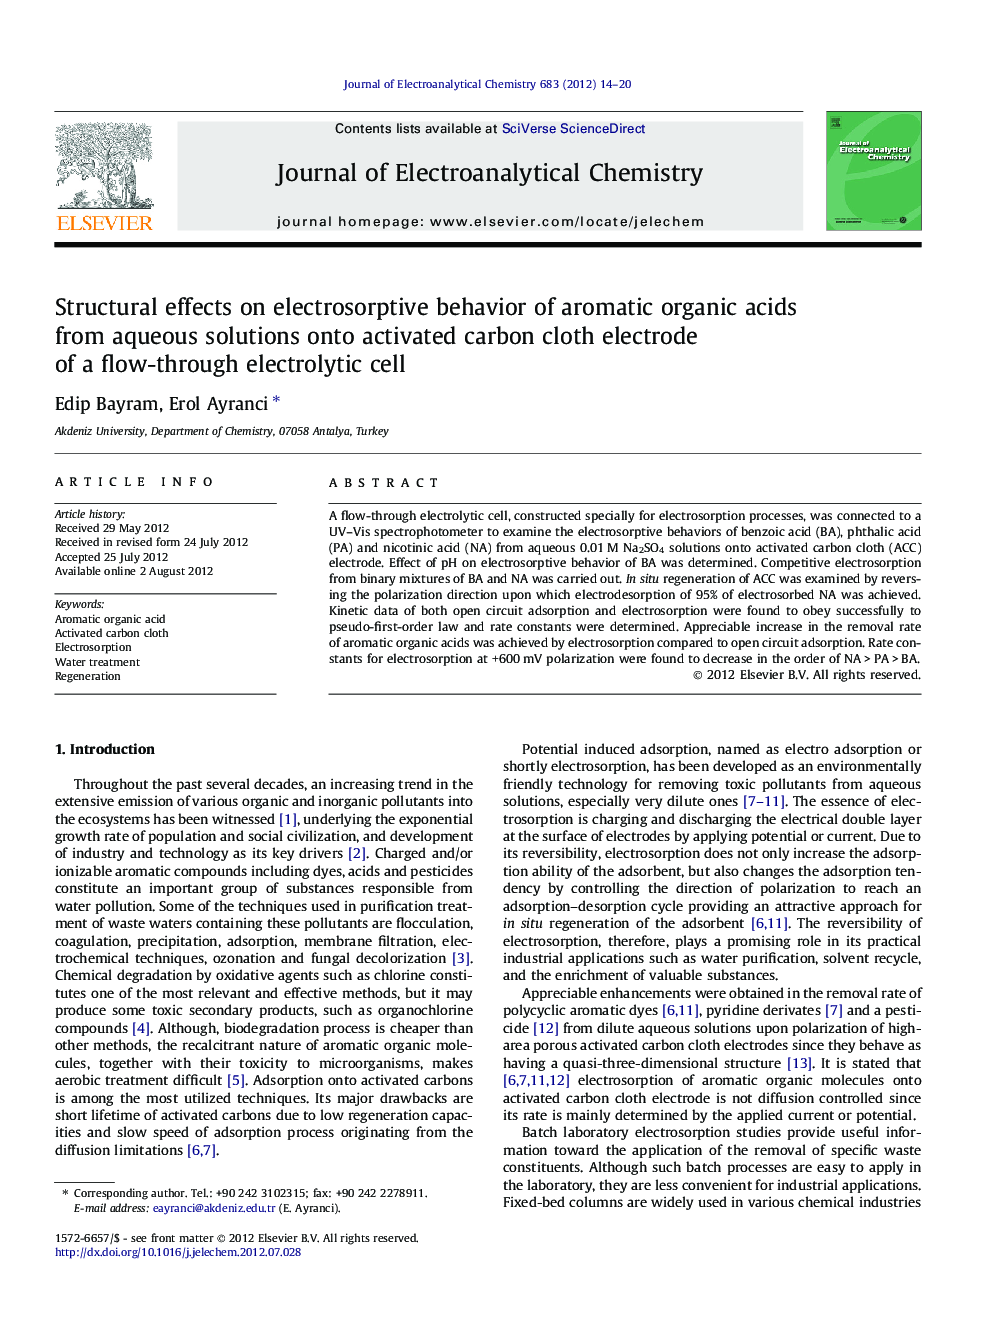 Structural effects on electrosorptive behavior of aromatic organic acids from aqueous solutions onto activated carbon cloth electrode of a flow-through electrolytic cell